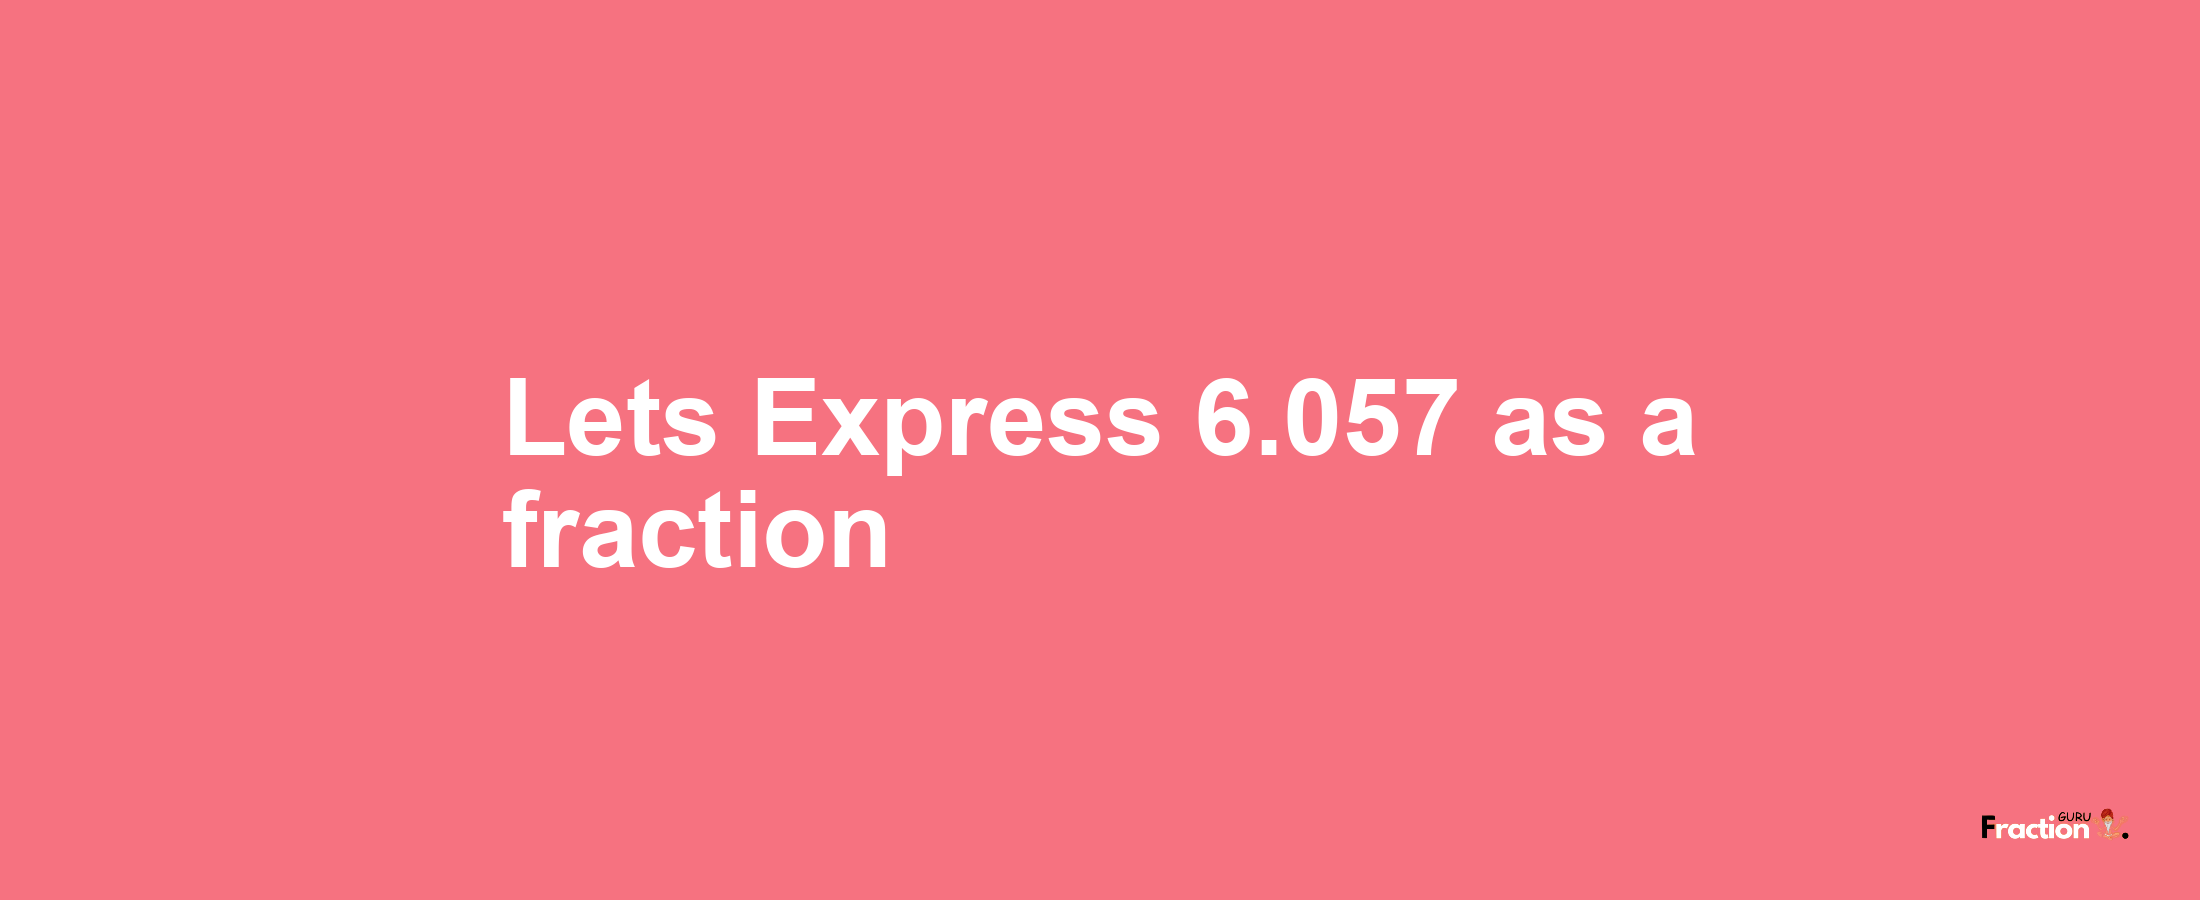 Lets Express 6.057 as afraction